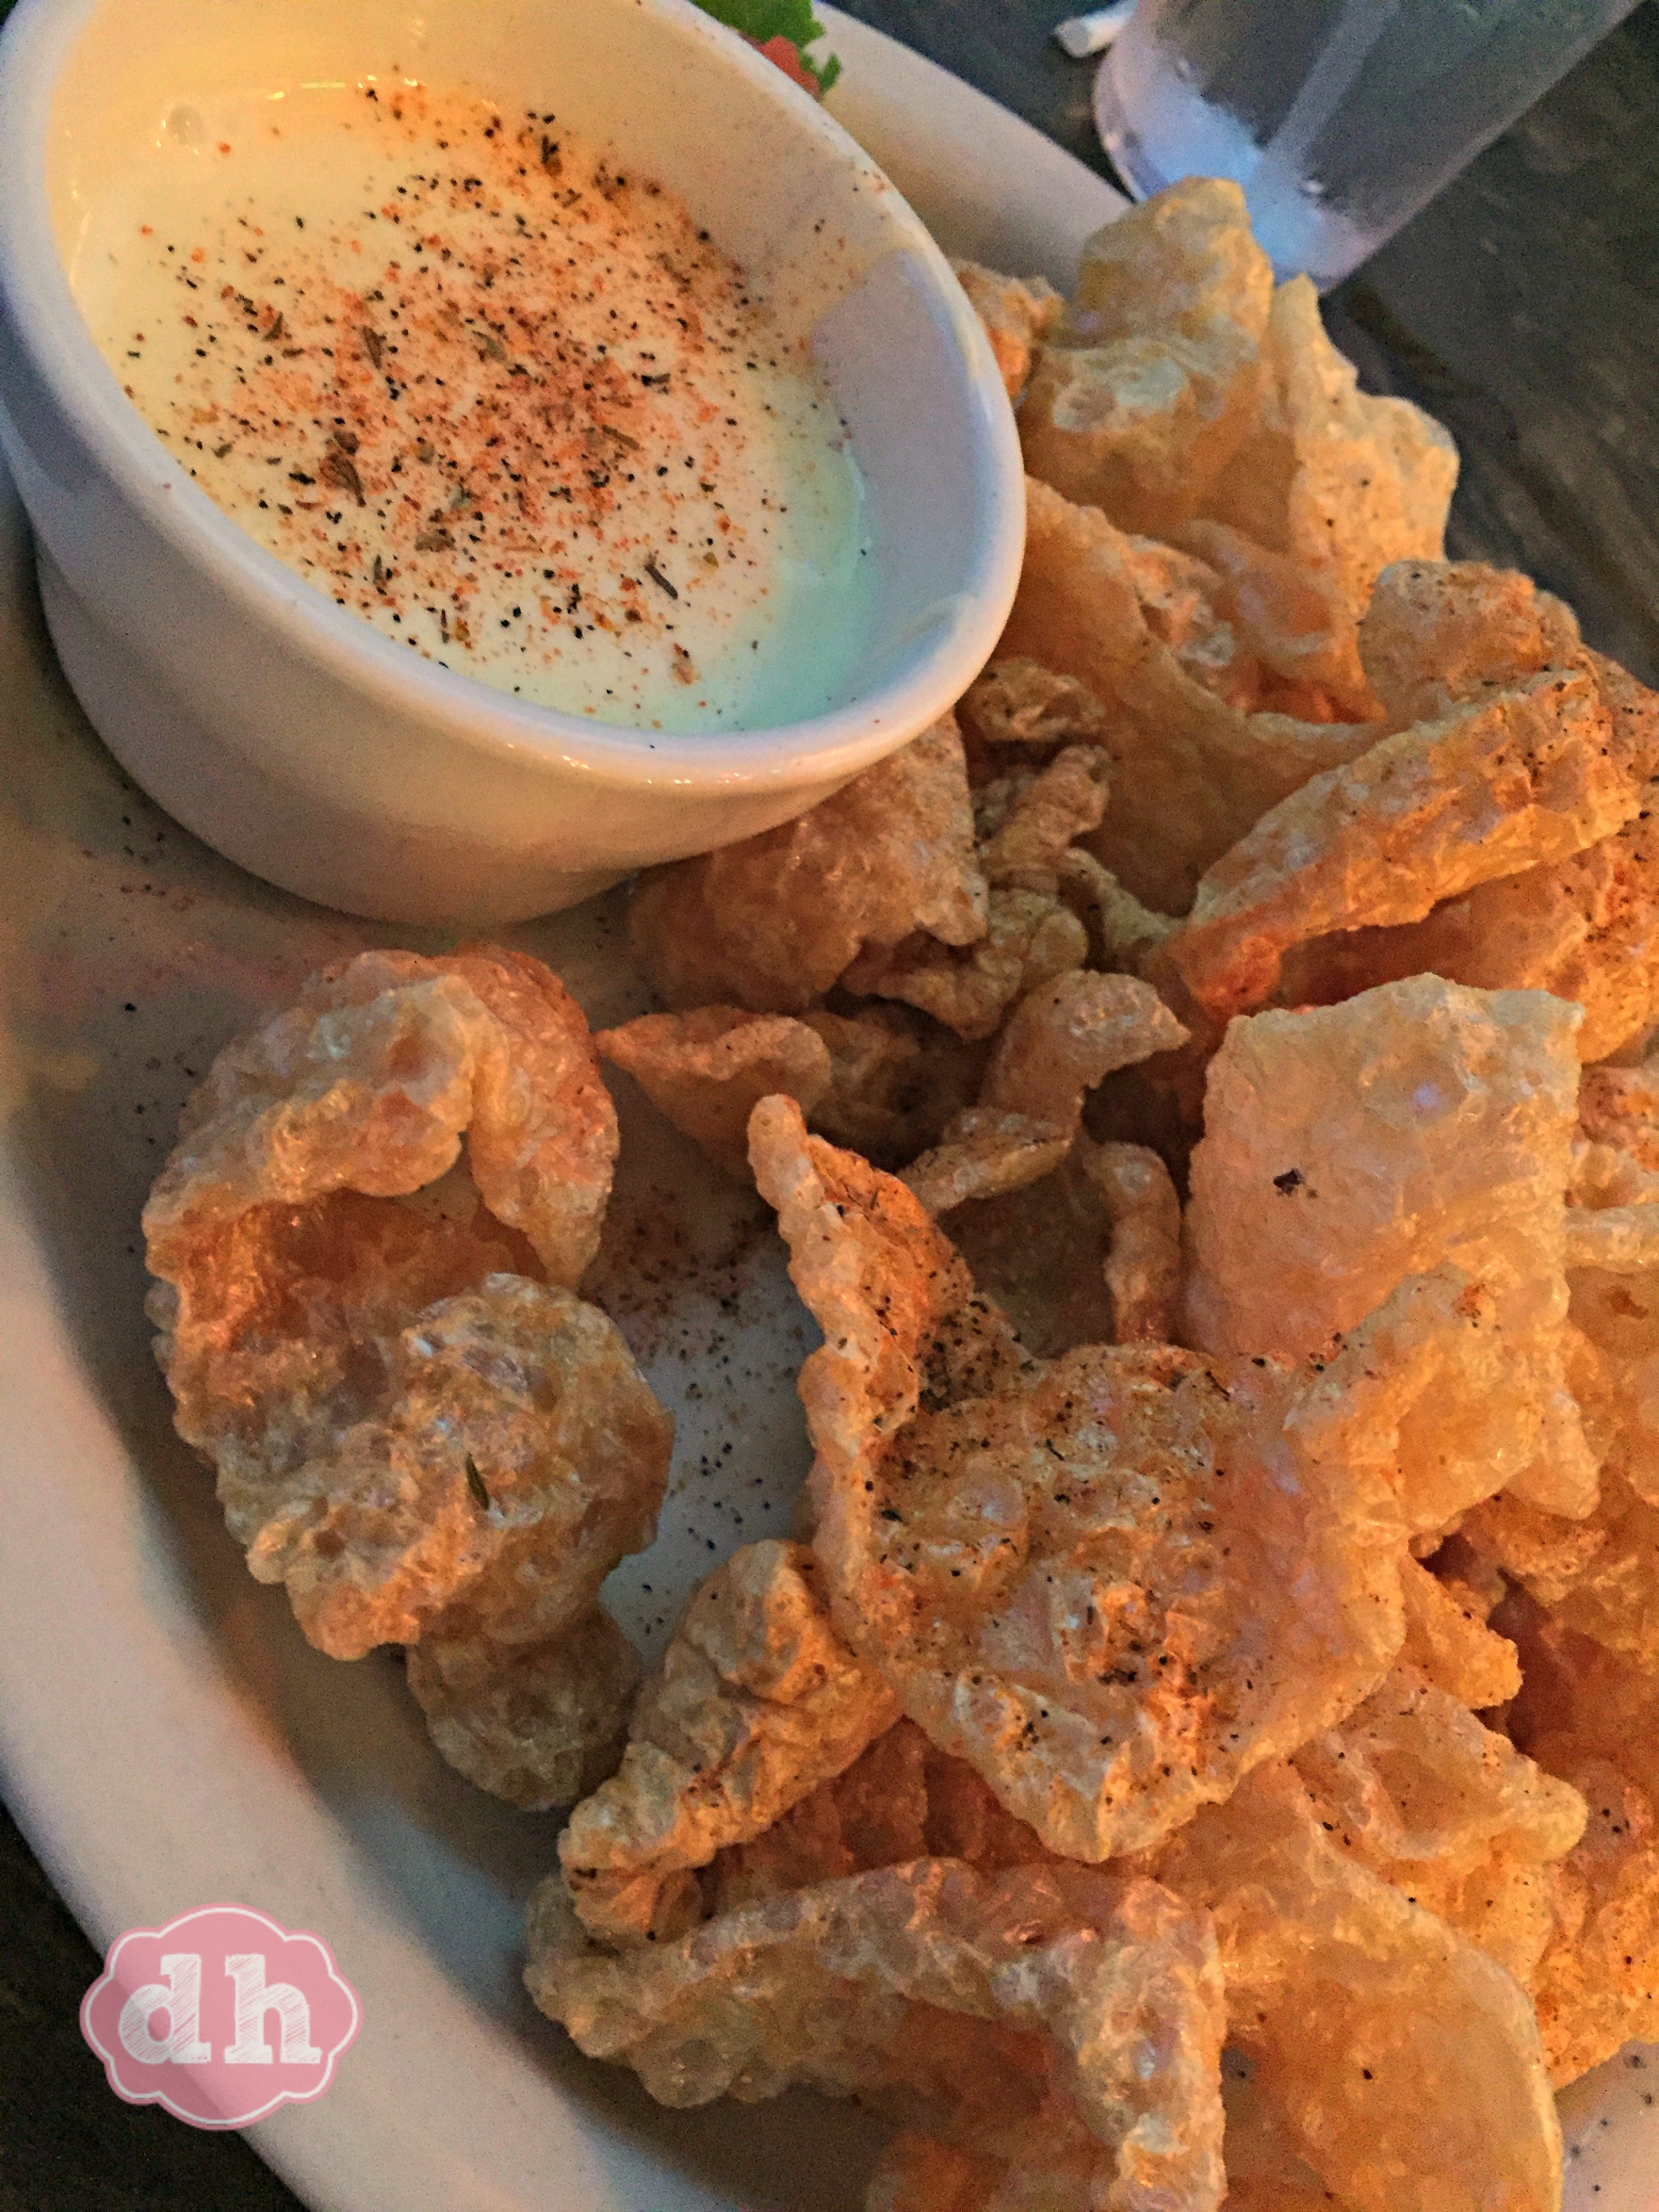 My First Taste of Homemade Pork Rinds at the Florabama Yacht Club